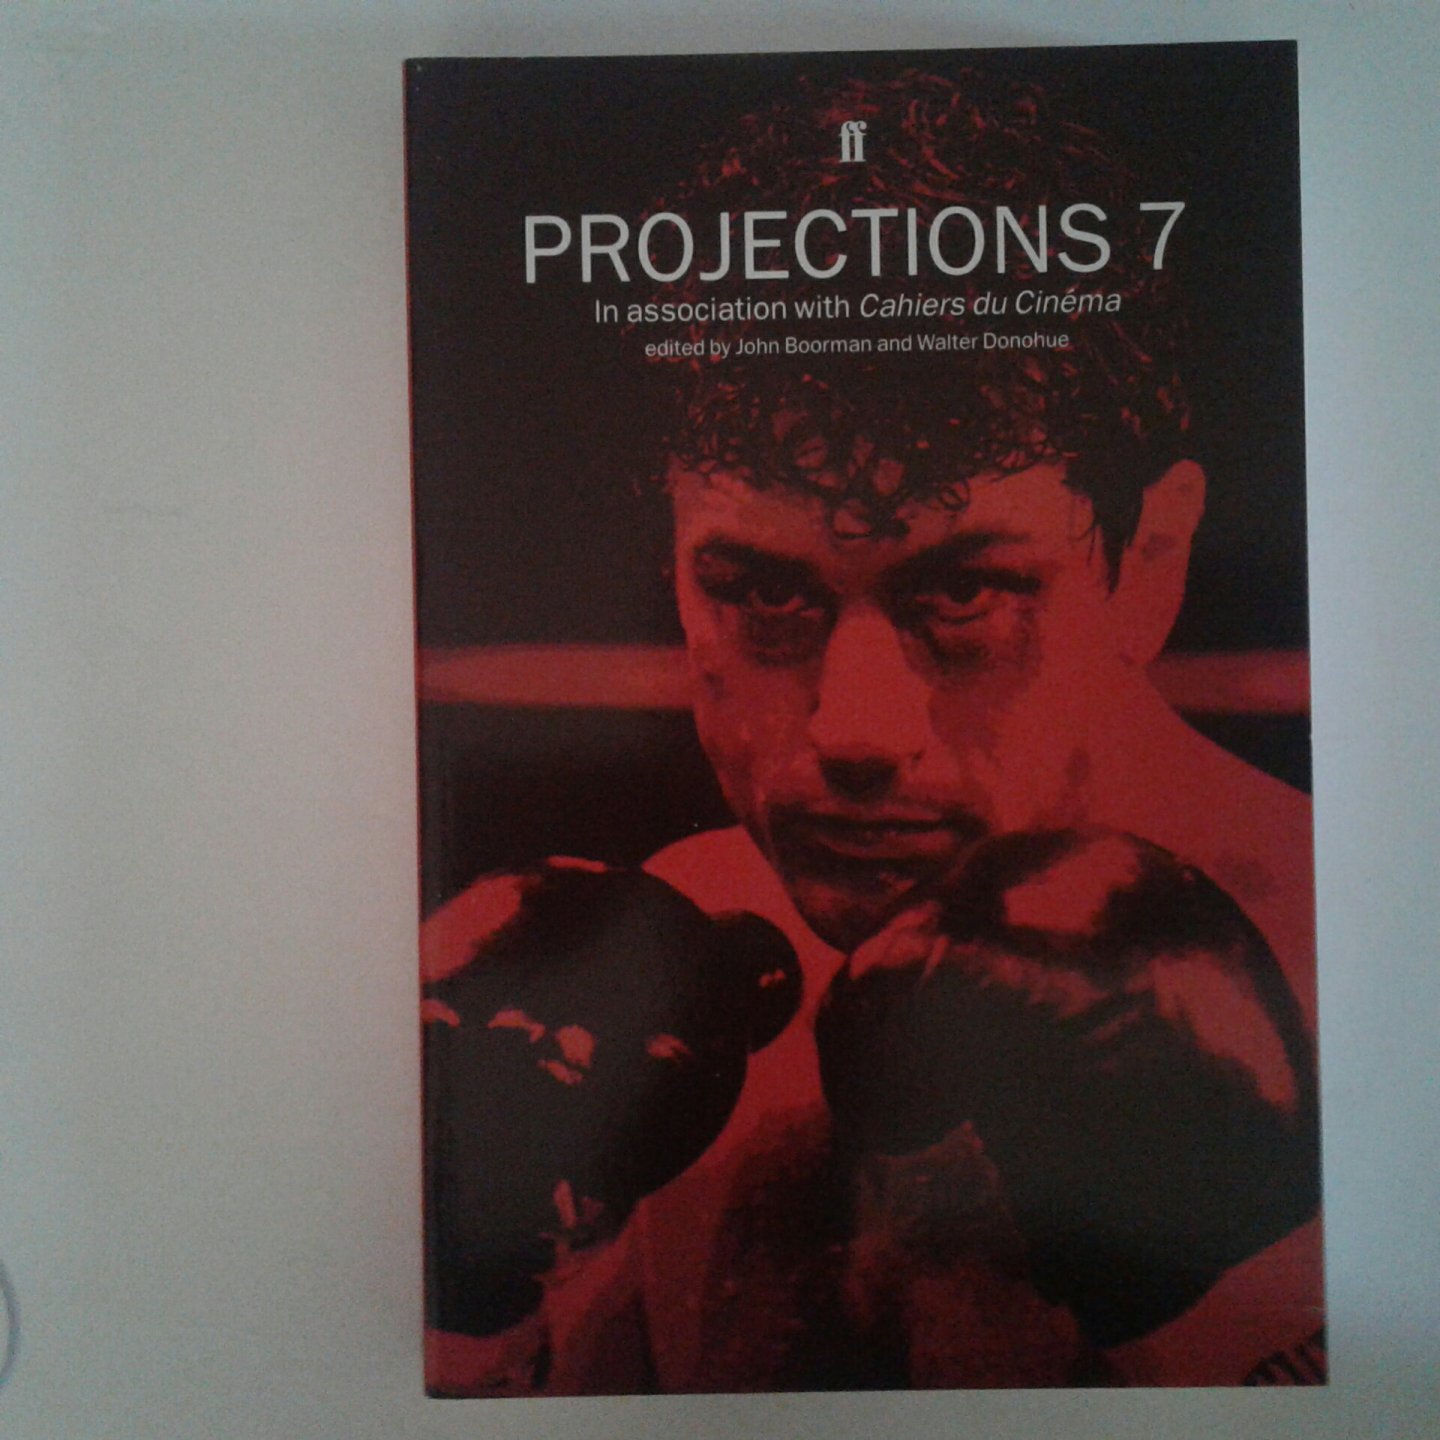 Boorman, John ; Walter Donohue - Projections 7 ; Film-makers on Film-making in association with Cahiers du Cinema